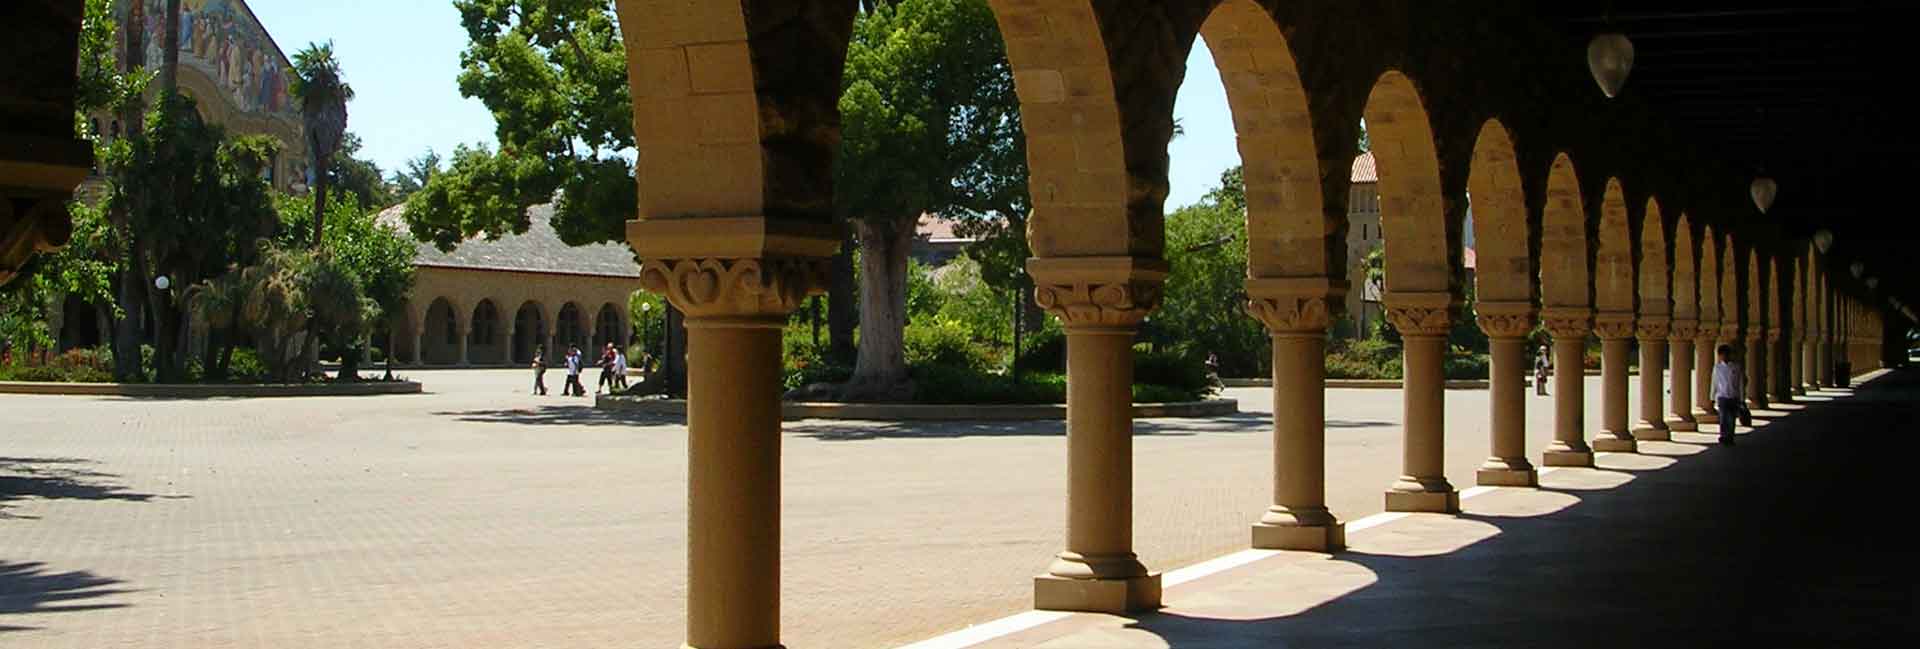 Pillars on the Campus of Stanford University